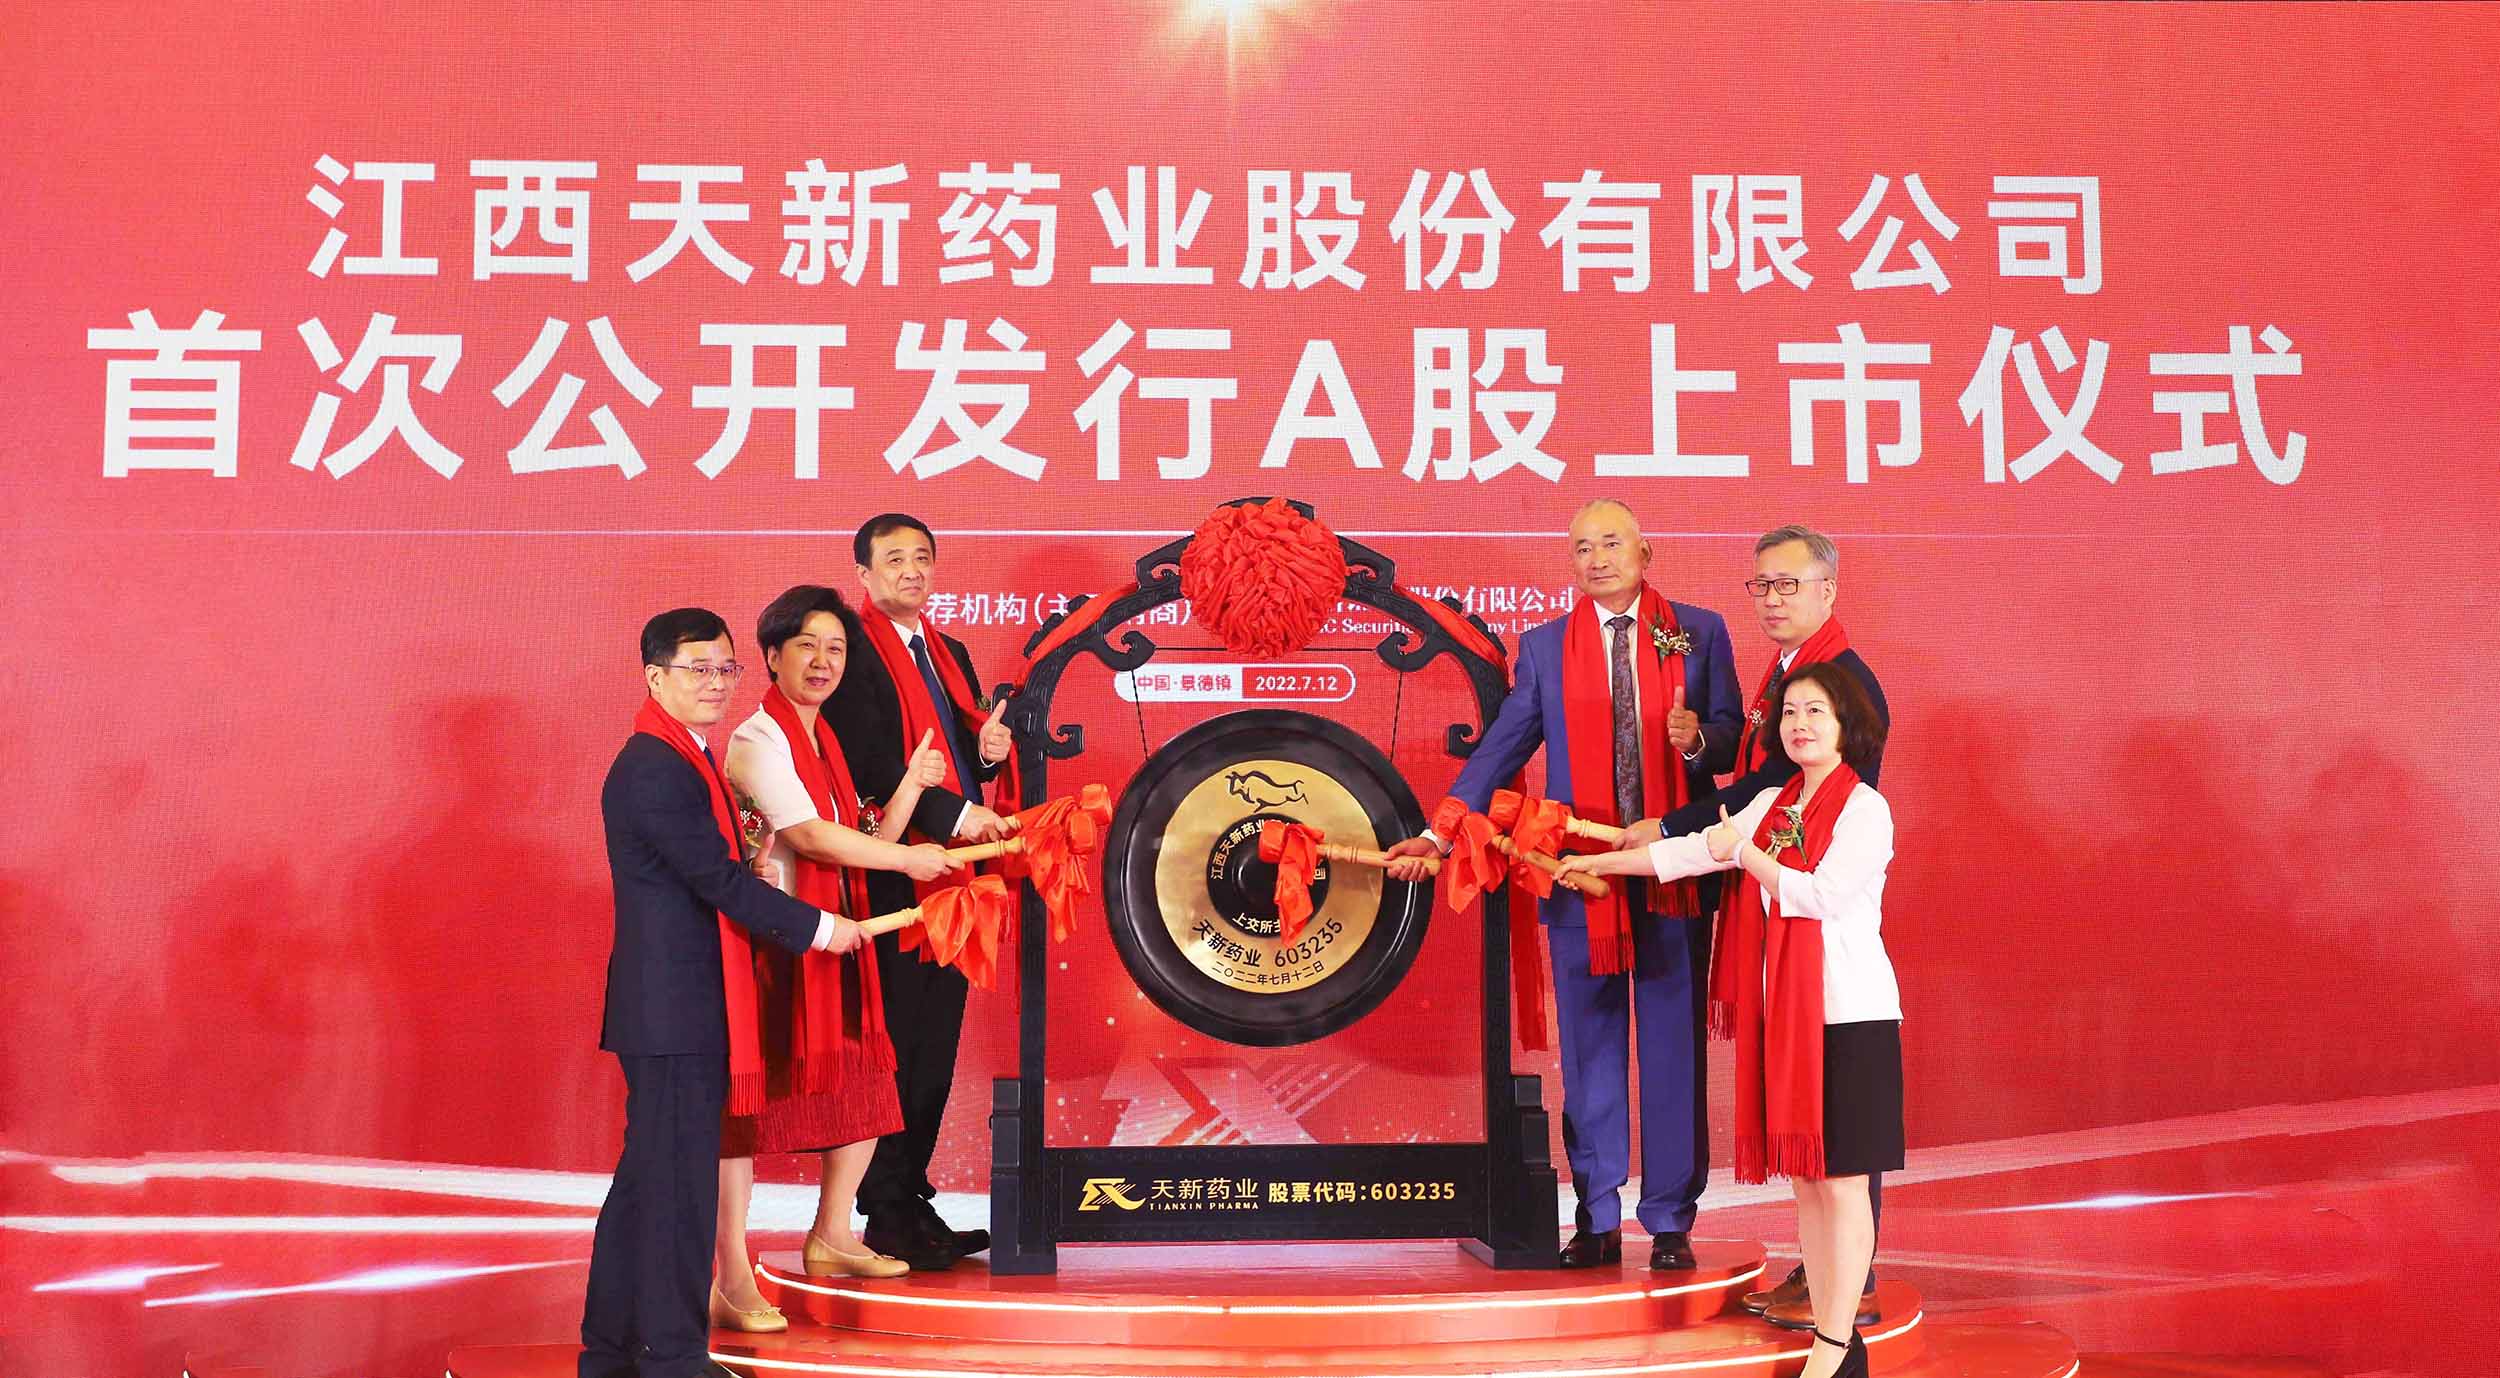 Jiangxi Tianxin Pharmaceutical Co., Ltd. successfully listed on the main board of Shanghai Stock Exchange